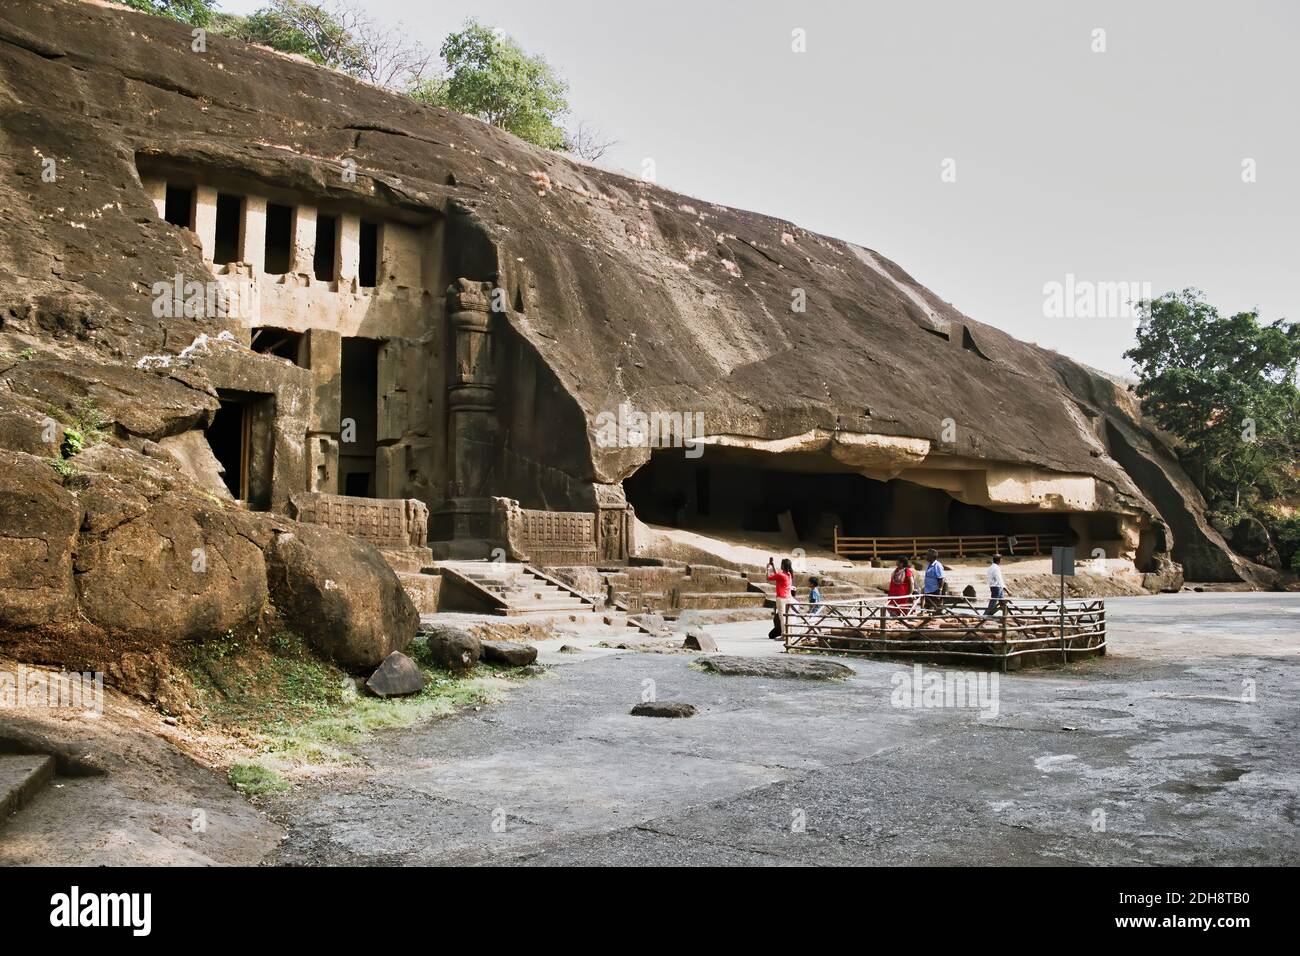 Mumbai, India - October 22, 2018: Exterior of Buddhist heritage cave temple Kanheri cave located in Borivali in Bombay during day time Stock Photo